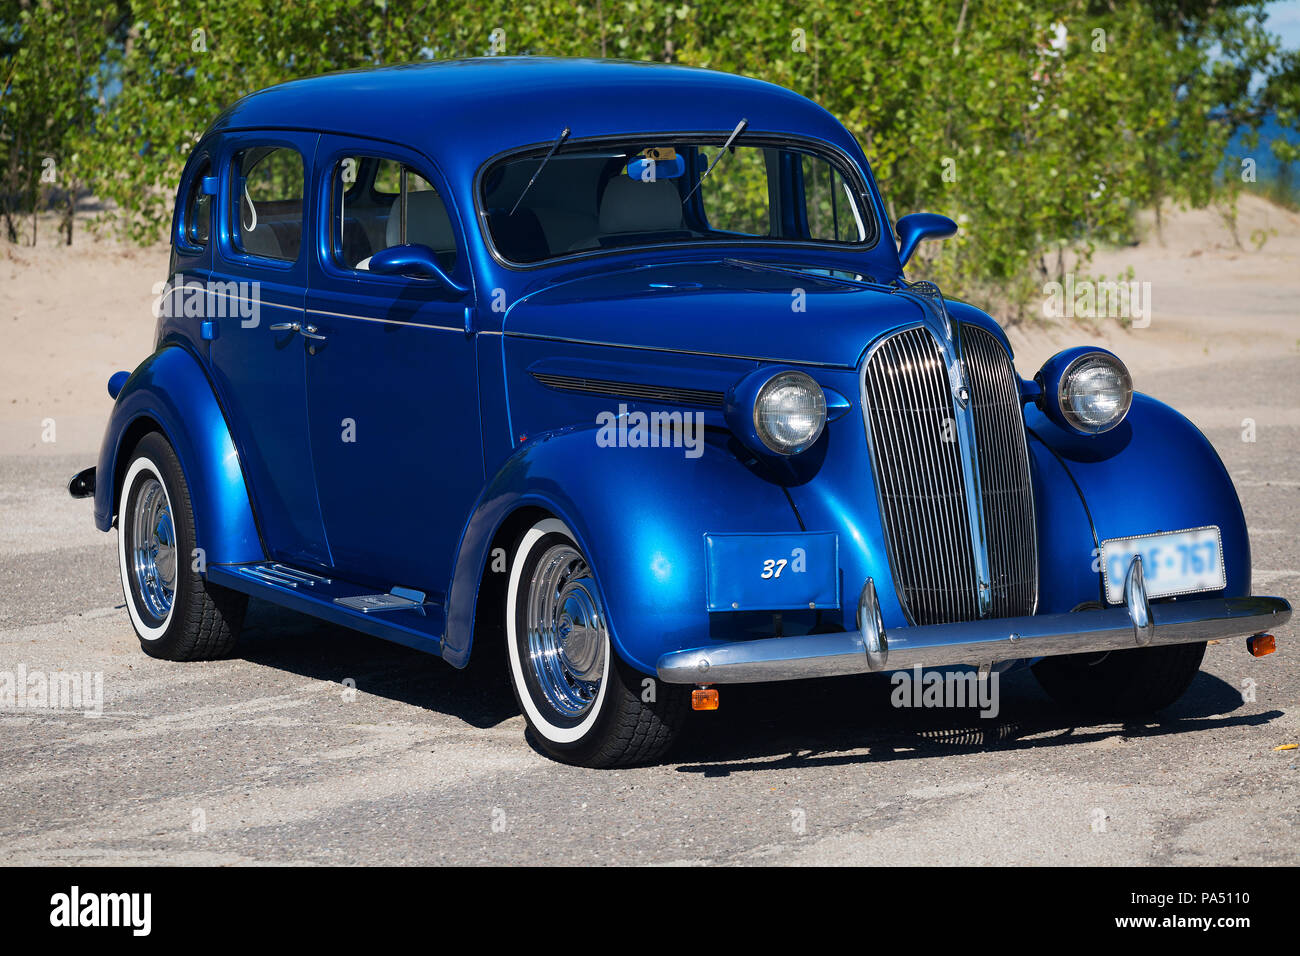 1937 Plymouth P4 Hot Rod Banque D'Images